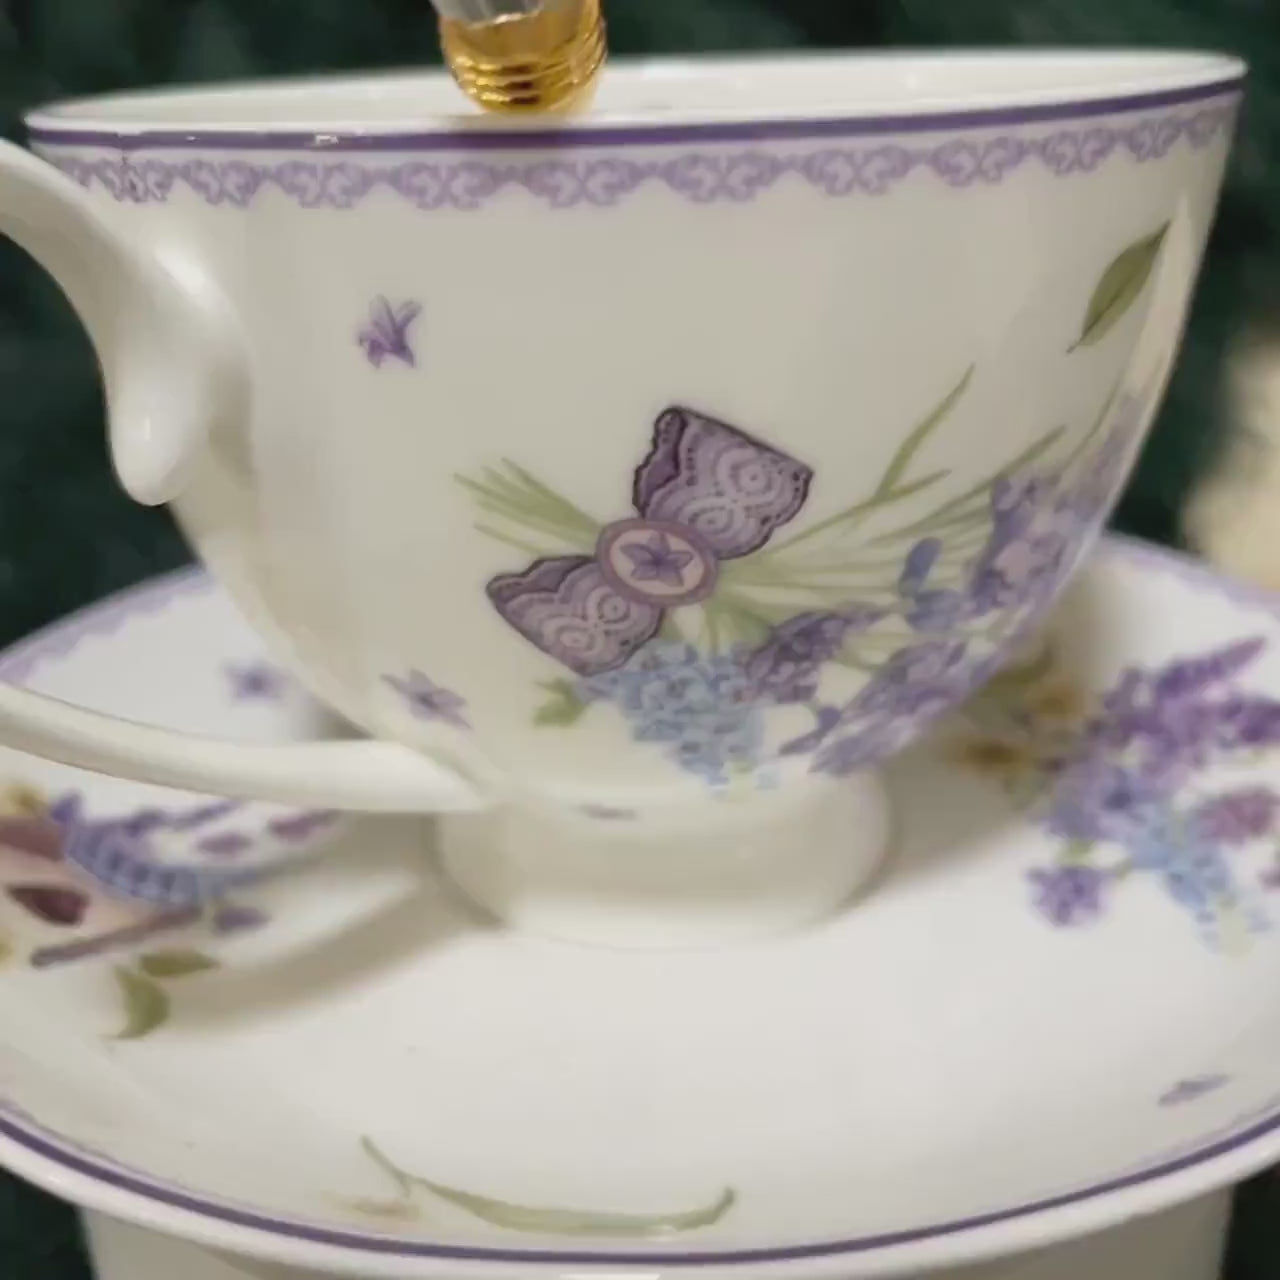 Lavender Tea cup and saucer set.  Teacup and Saucer Set. FREE online video course learn to read fortune teller tea cups.